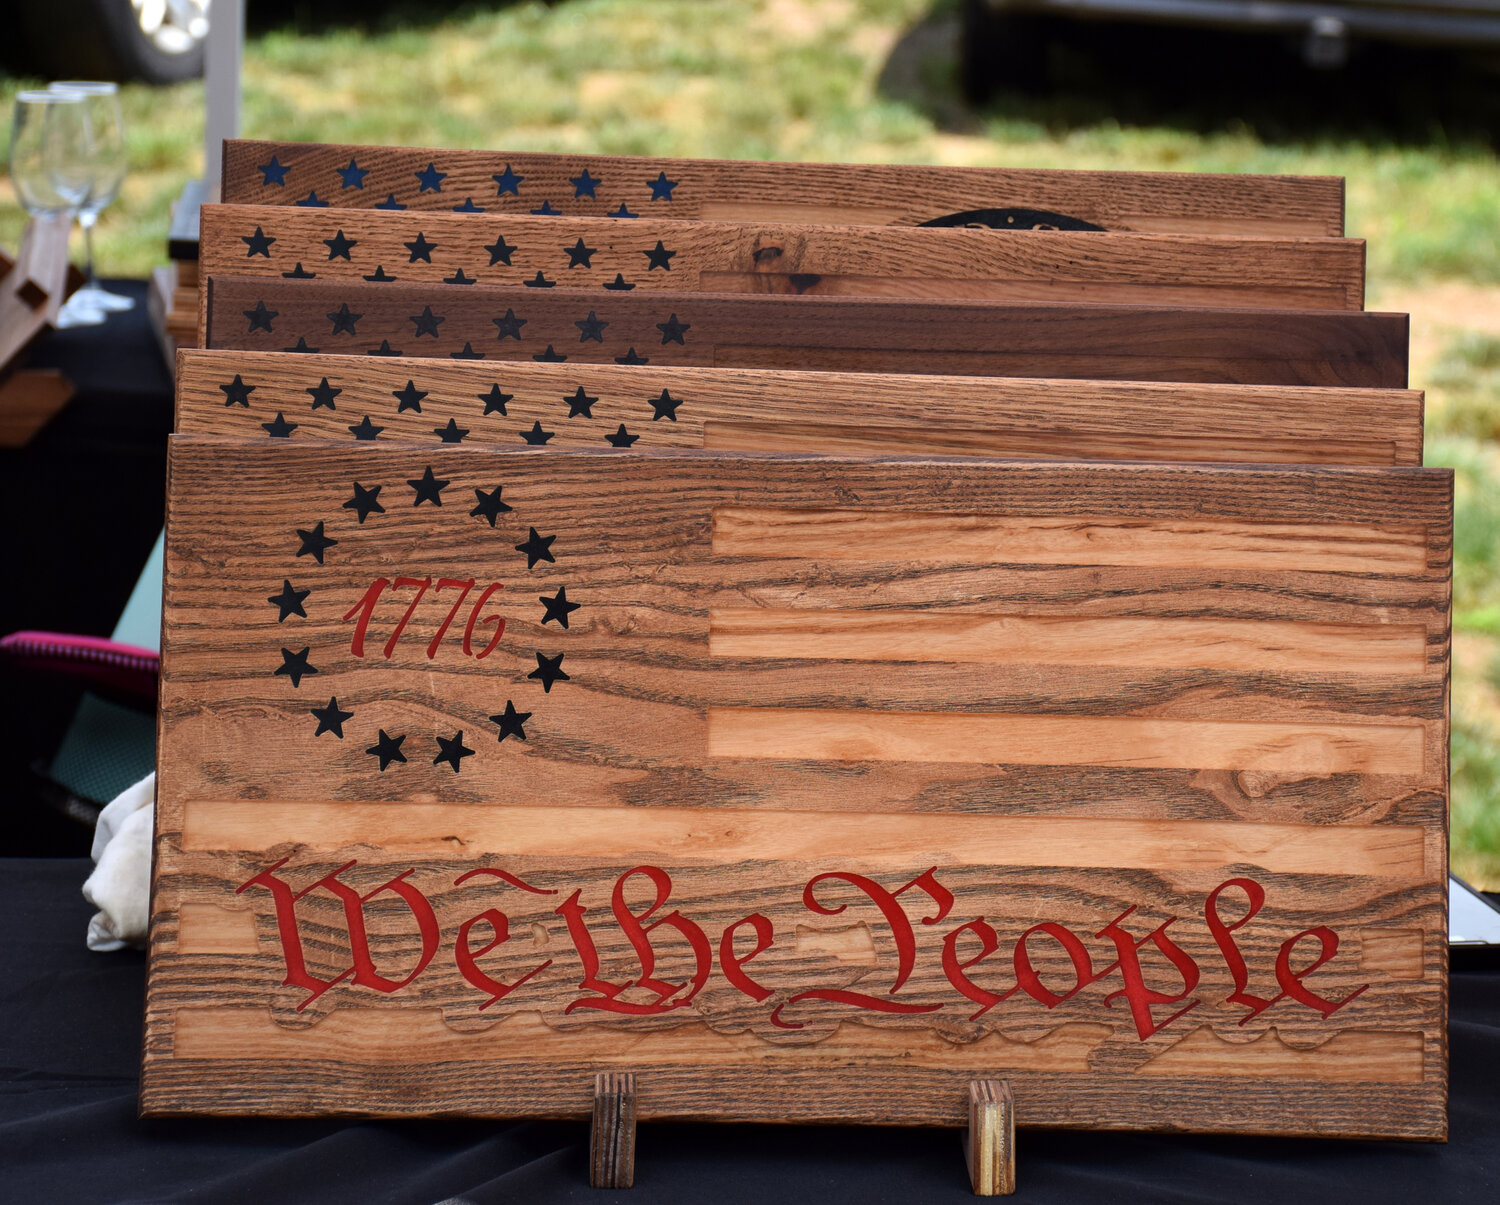 A wood carving created by A&N Rustic Customs, one of the artisan vendors at Quakertown Community Day Tuesday.